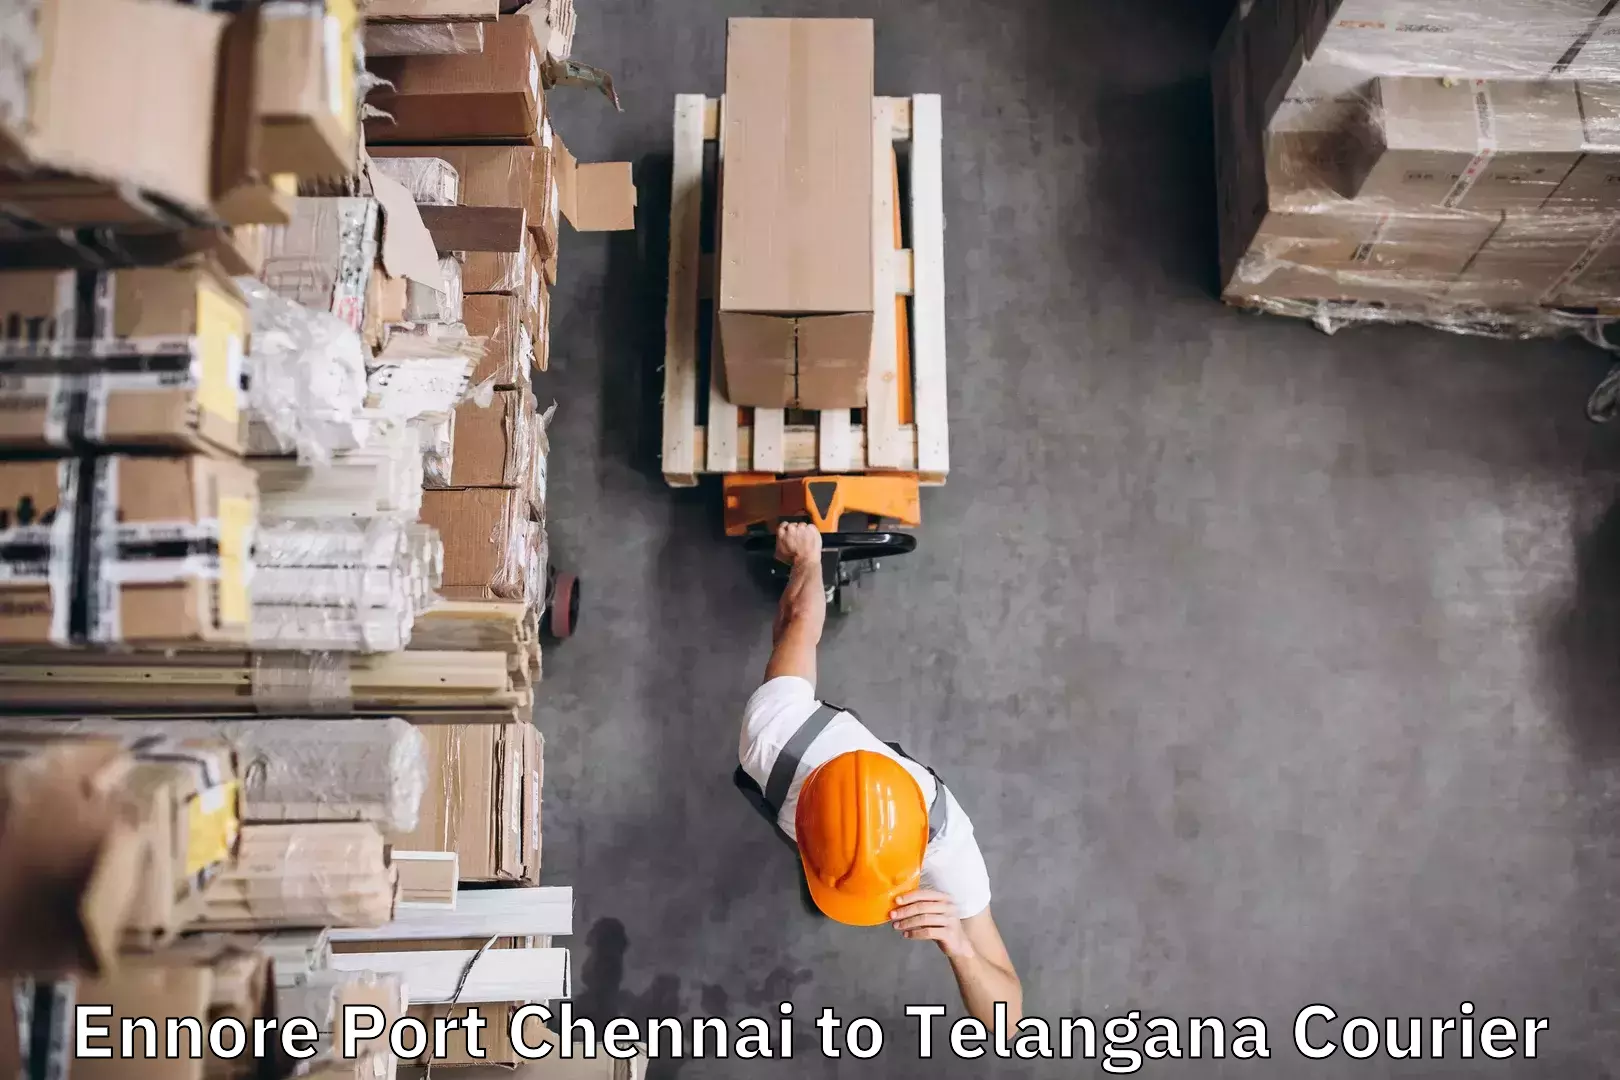 Luggage delivery system Ennore Port Chennai to Telangana